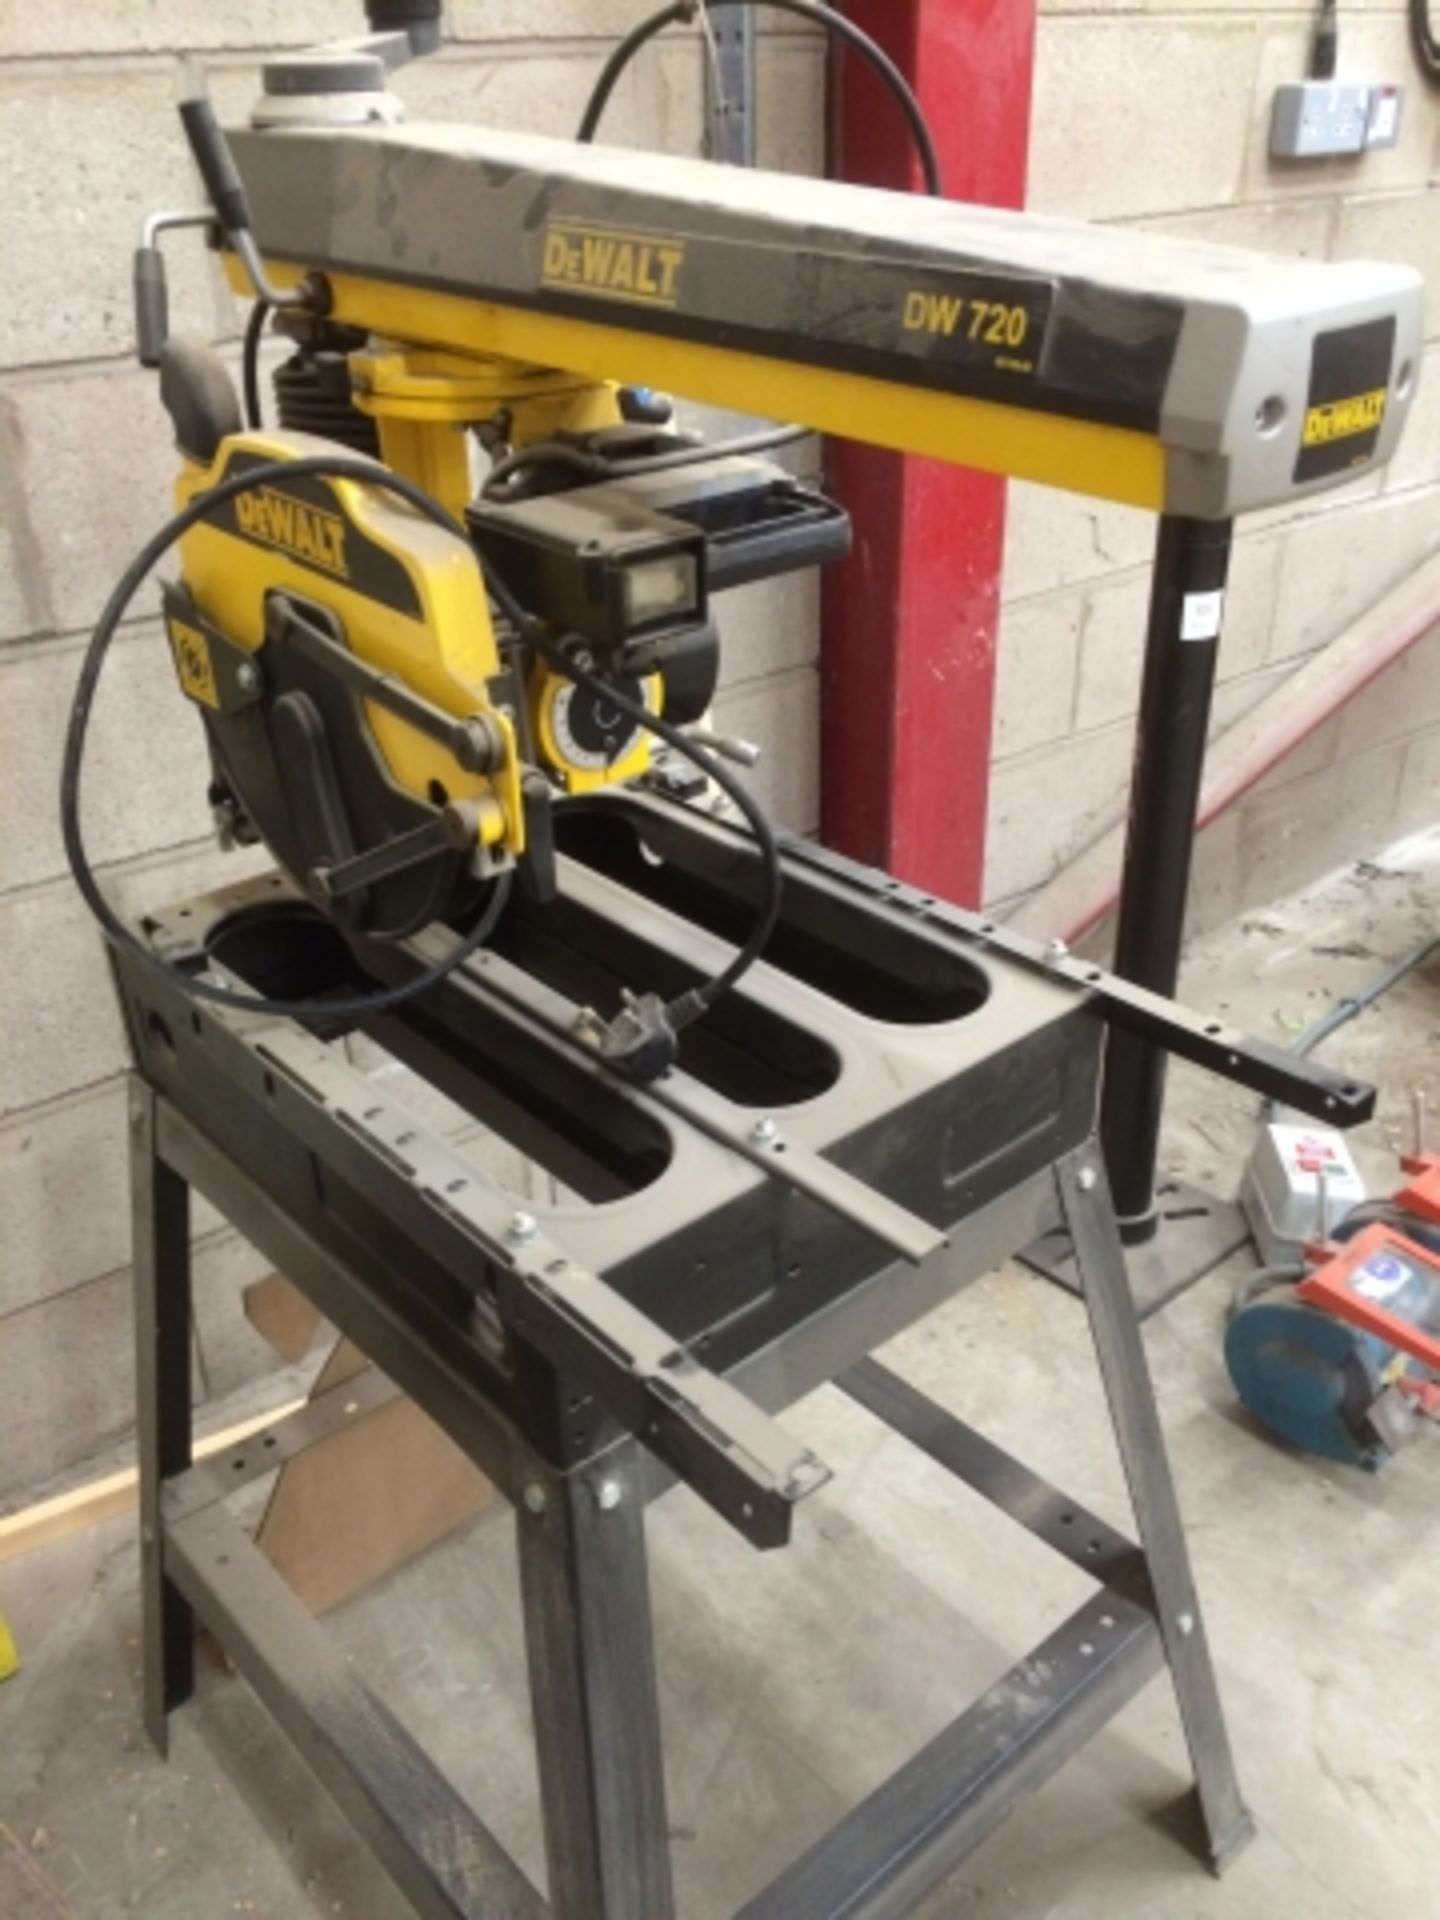 * De Walt DW720 Cross Cut Saw. Wolf Double End Bench Grinder and a Pedestal. This lot is located